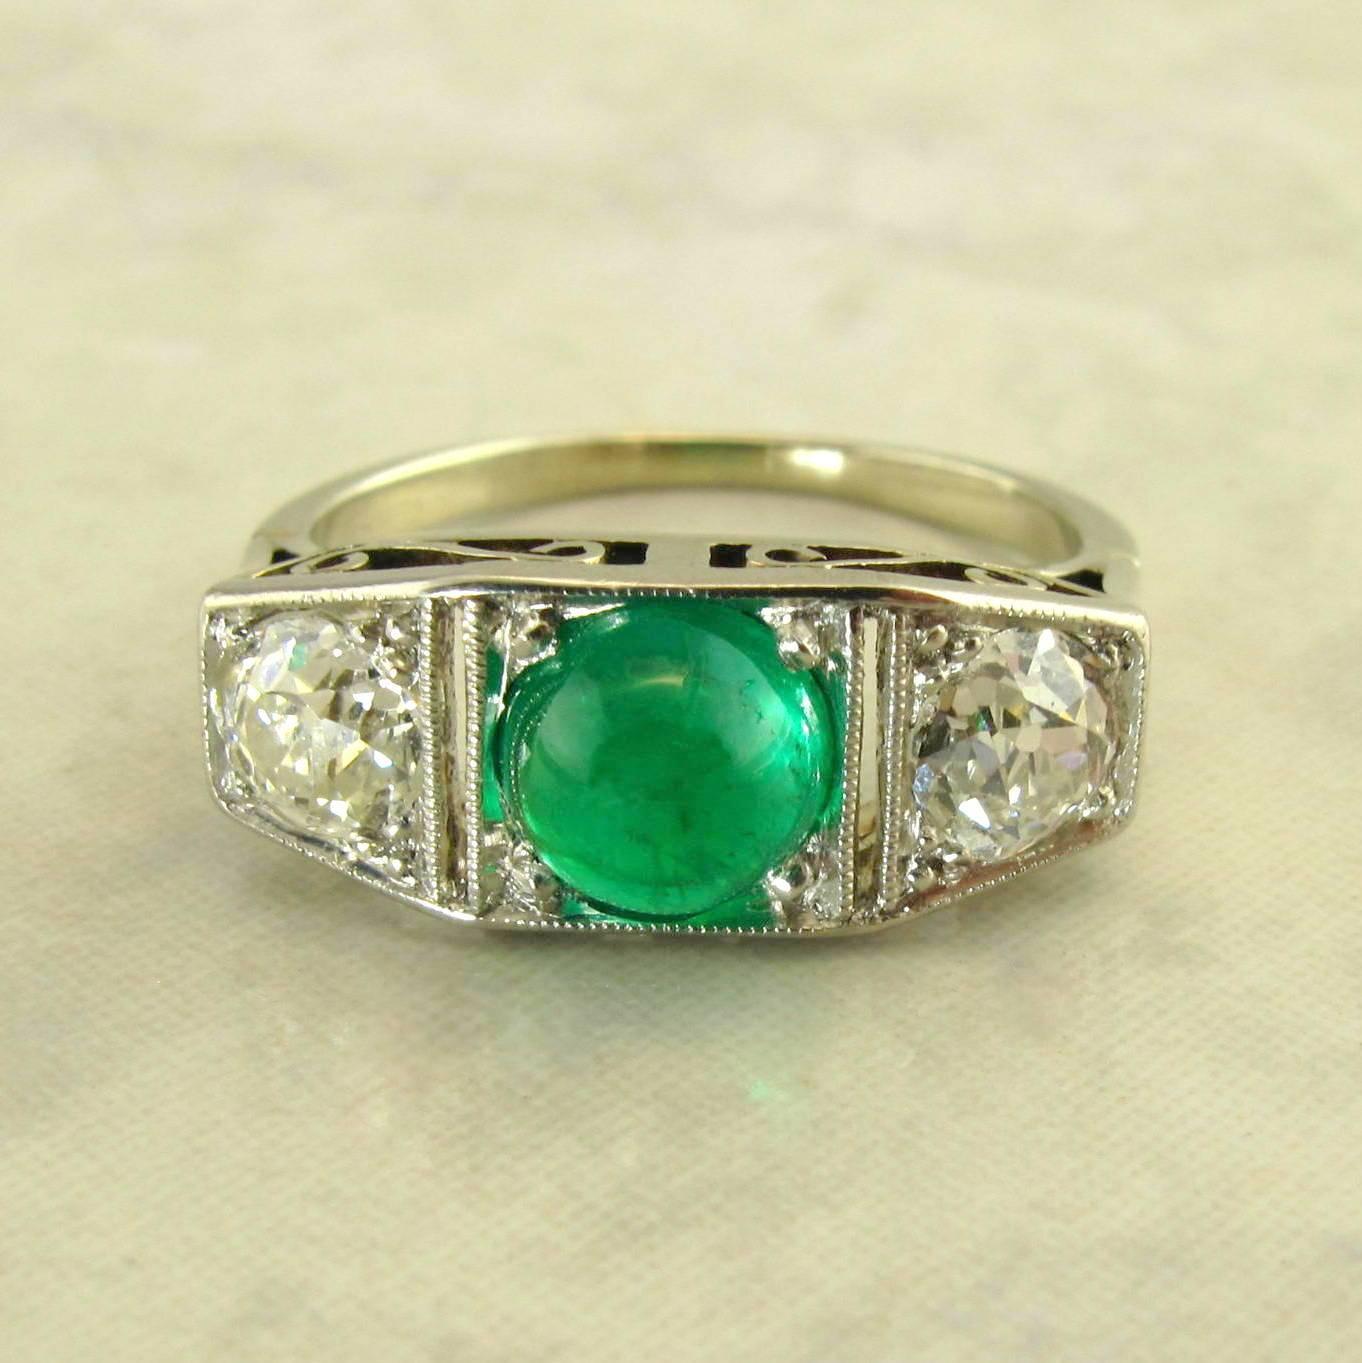 Platinum Art Deco Emerald and Diamond Ring.
The three stone rectangular Art Deco ring set with one center cabachon cut emerald weighing approximately 1.00 carats, accented by two old mine cut diamonds weighing approximately .80 carat total, with